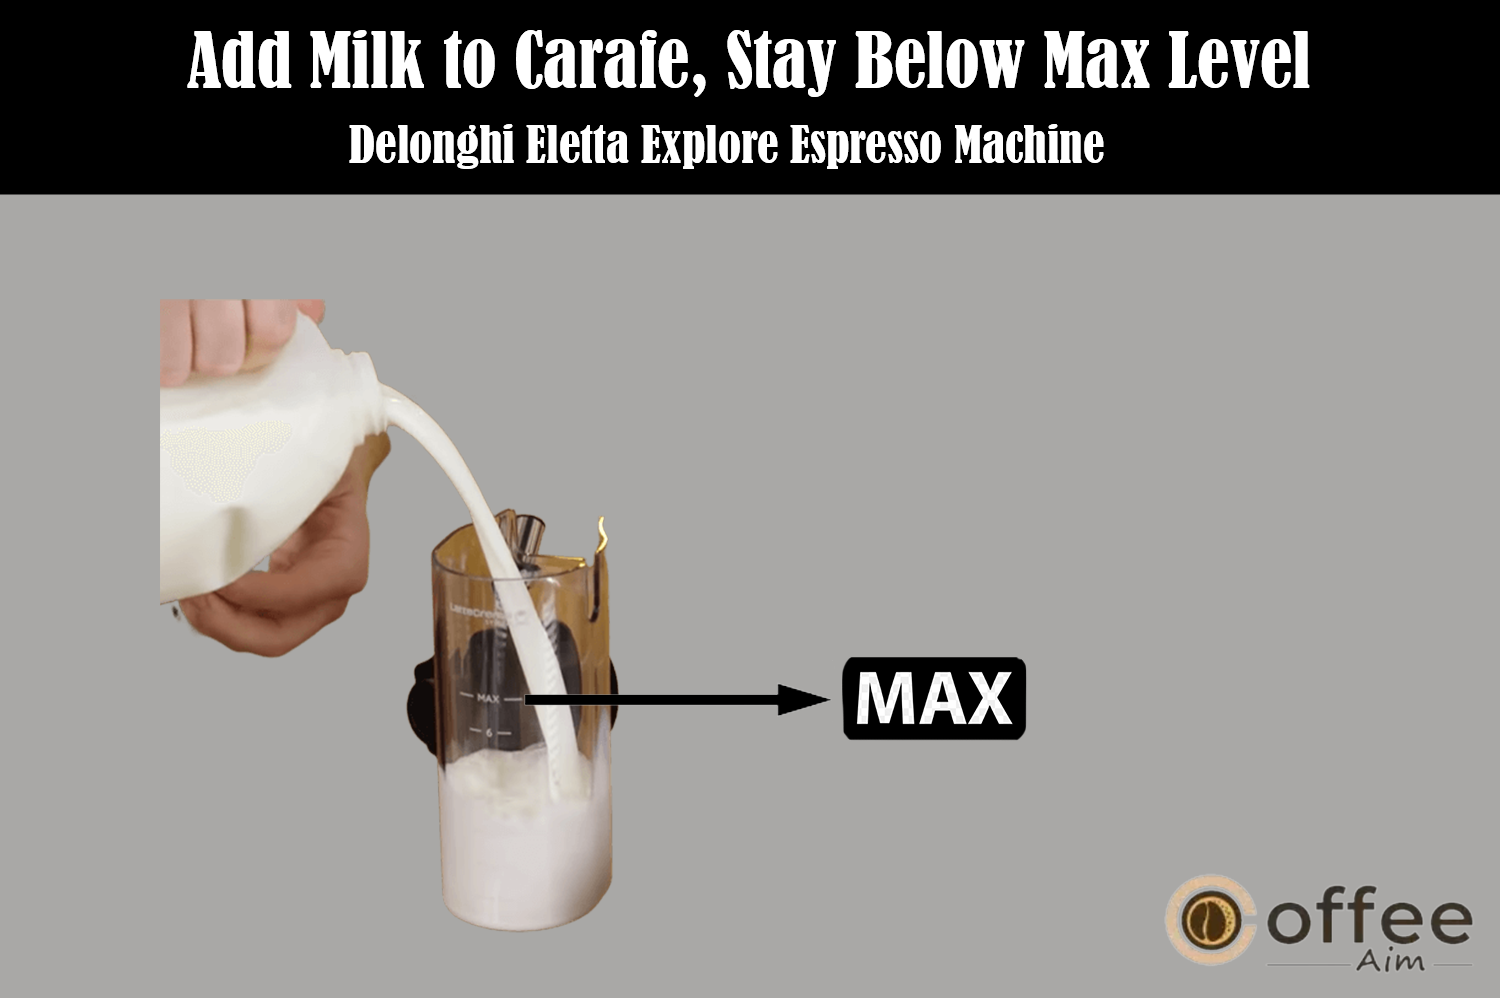 "The image demonstrates how to fill the milk carafe of the "Delonghi Eletta Explore Espresso Machine" without surpassing the MAX level, a crucial step highlighted in the article "How to Use the Delonghi Eletta Explore Espresso Machine."